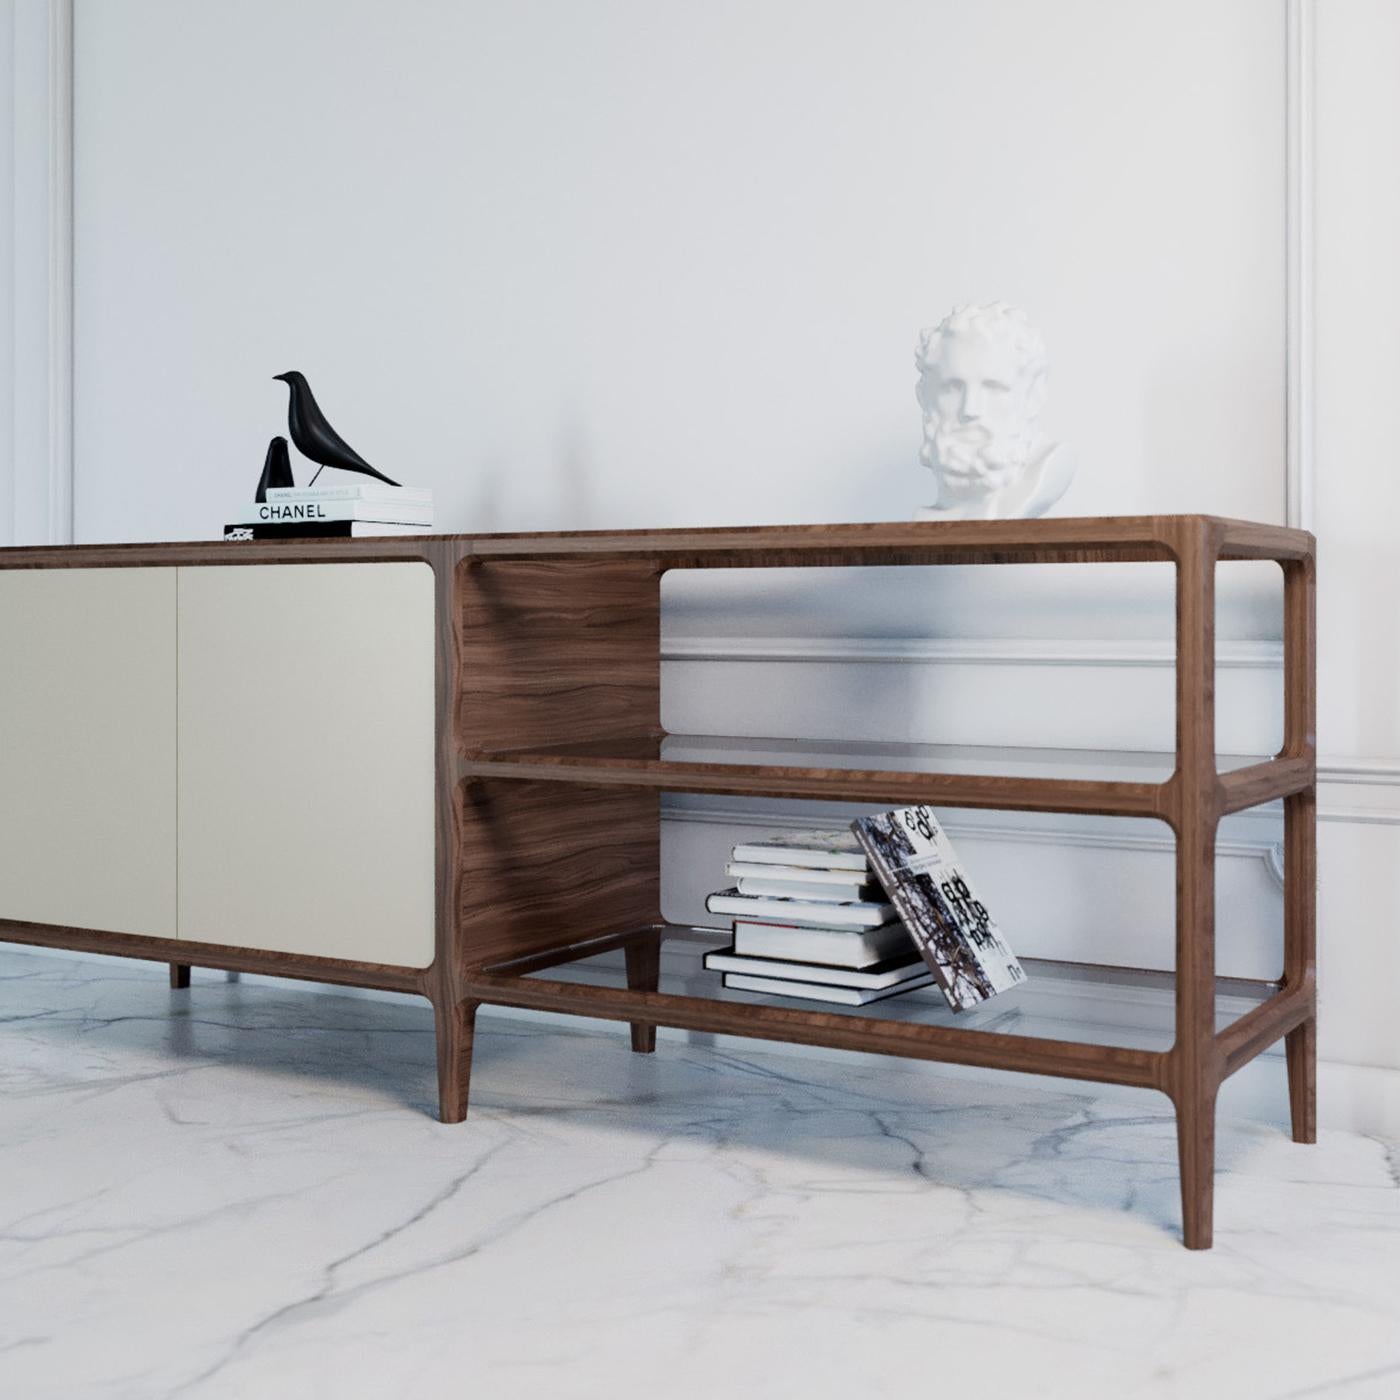 The skillful combination of prized details on an essential ash frame makes this sideboard a one-of-a-kind piece. Its solid structure stands on six feet and comprises an open shelving unit with two glass shelves and a regular unit featuring two doors